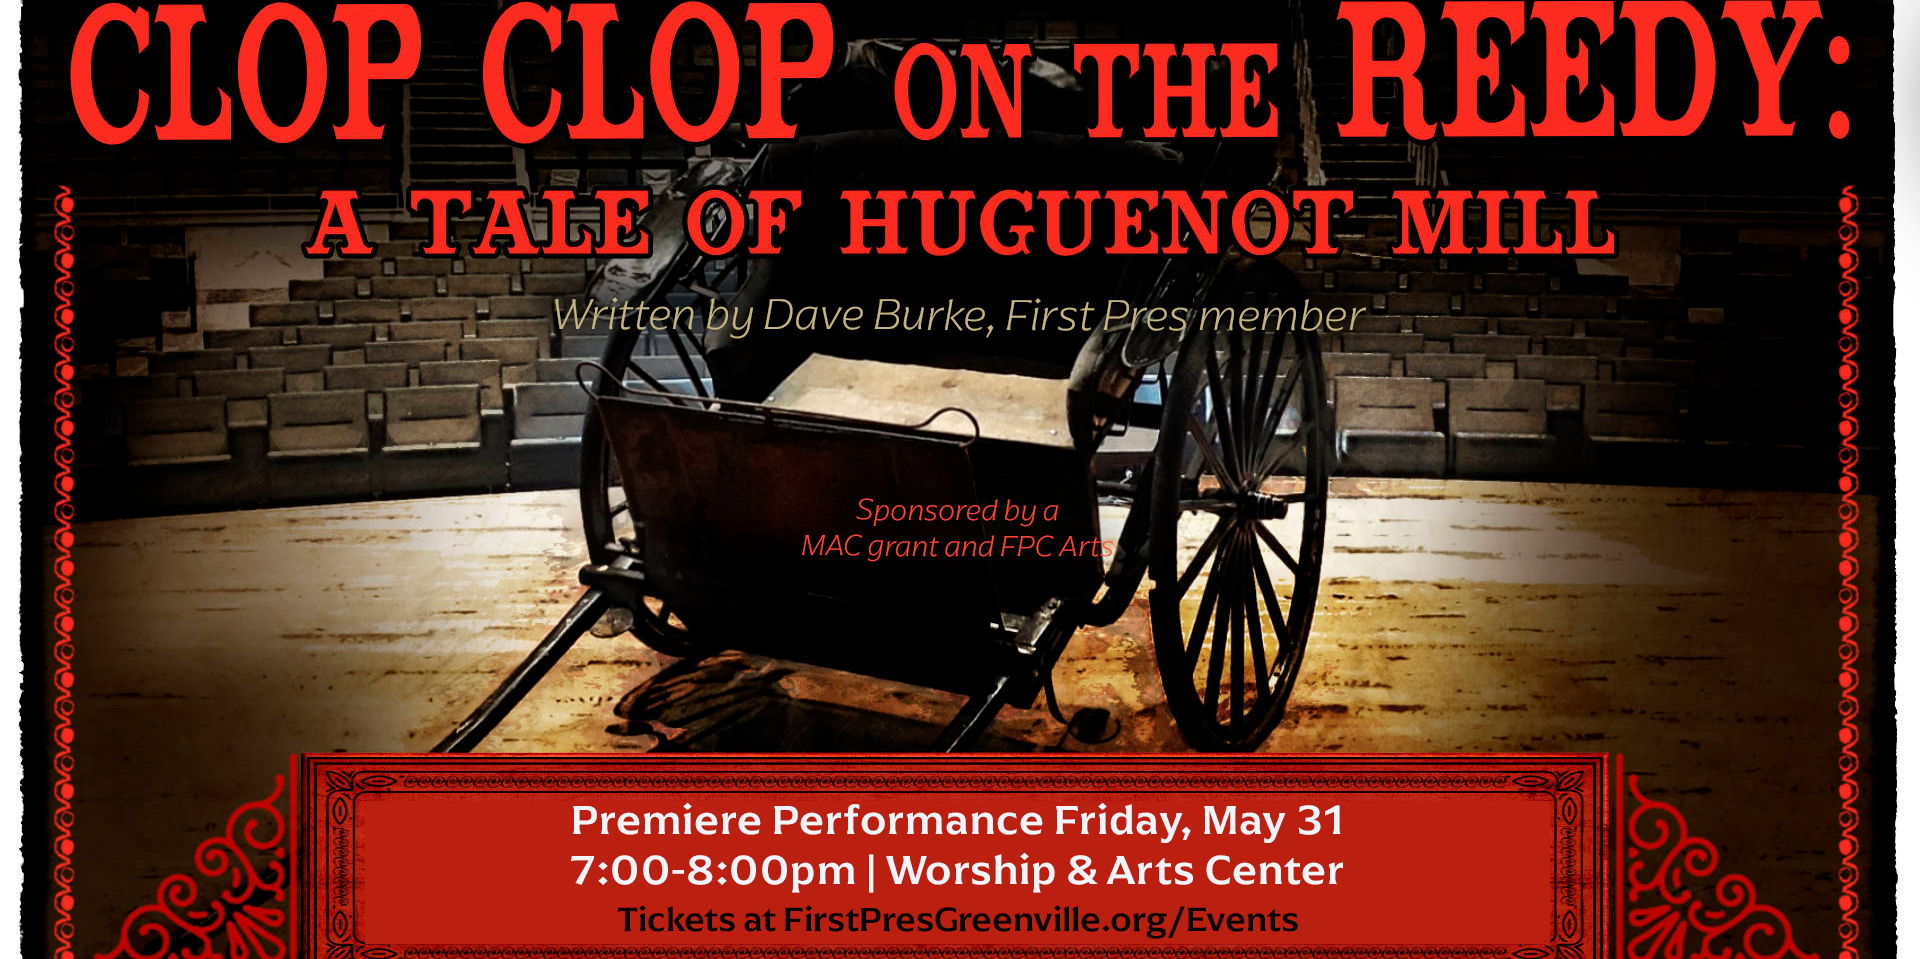 Clop Clop on the Reedy: A Tale of Huguenot Mill promotional image